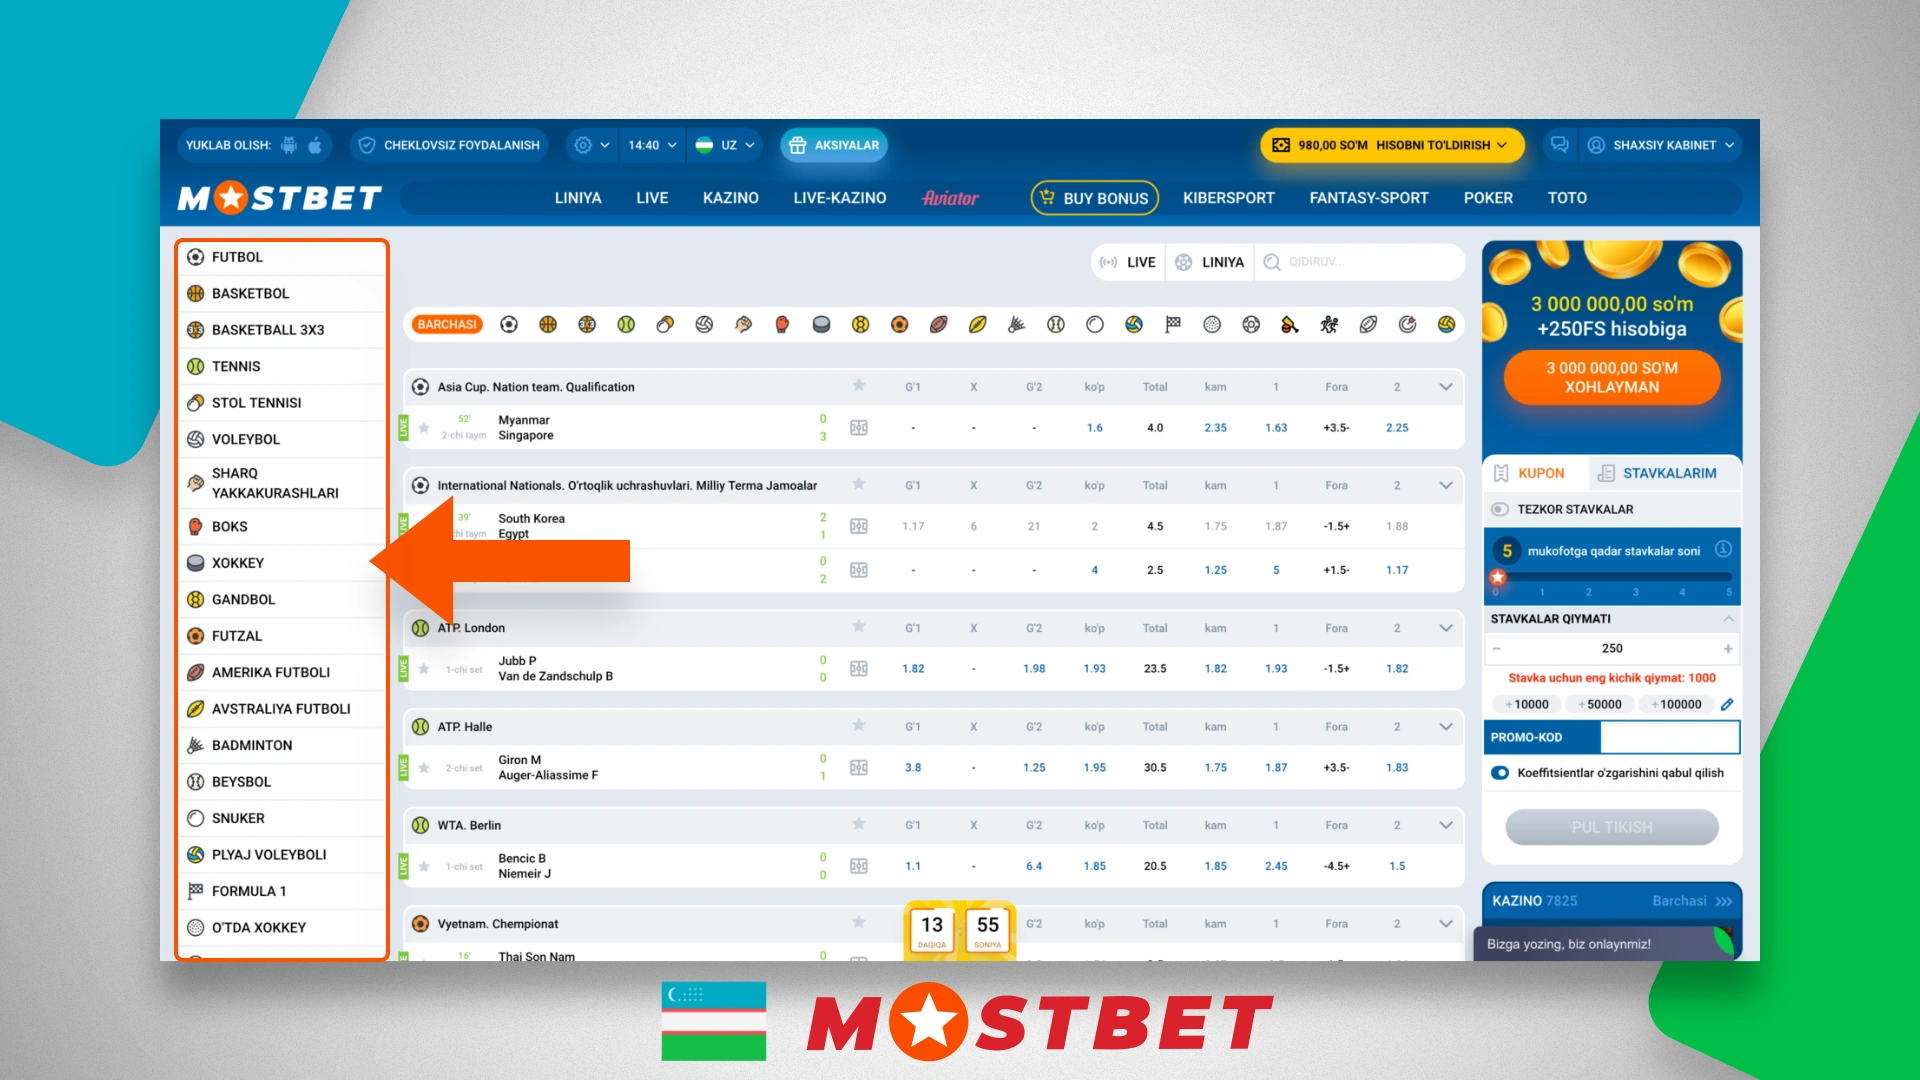 7 Days To Improving The Way You Bookmaker Mostbet and online casino in Kazakhstan